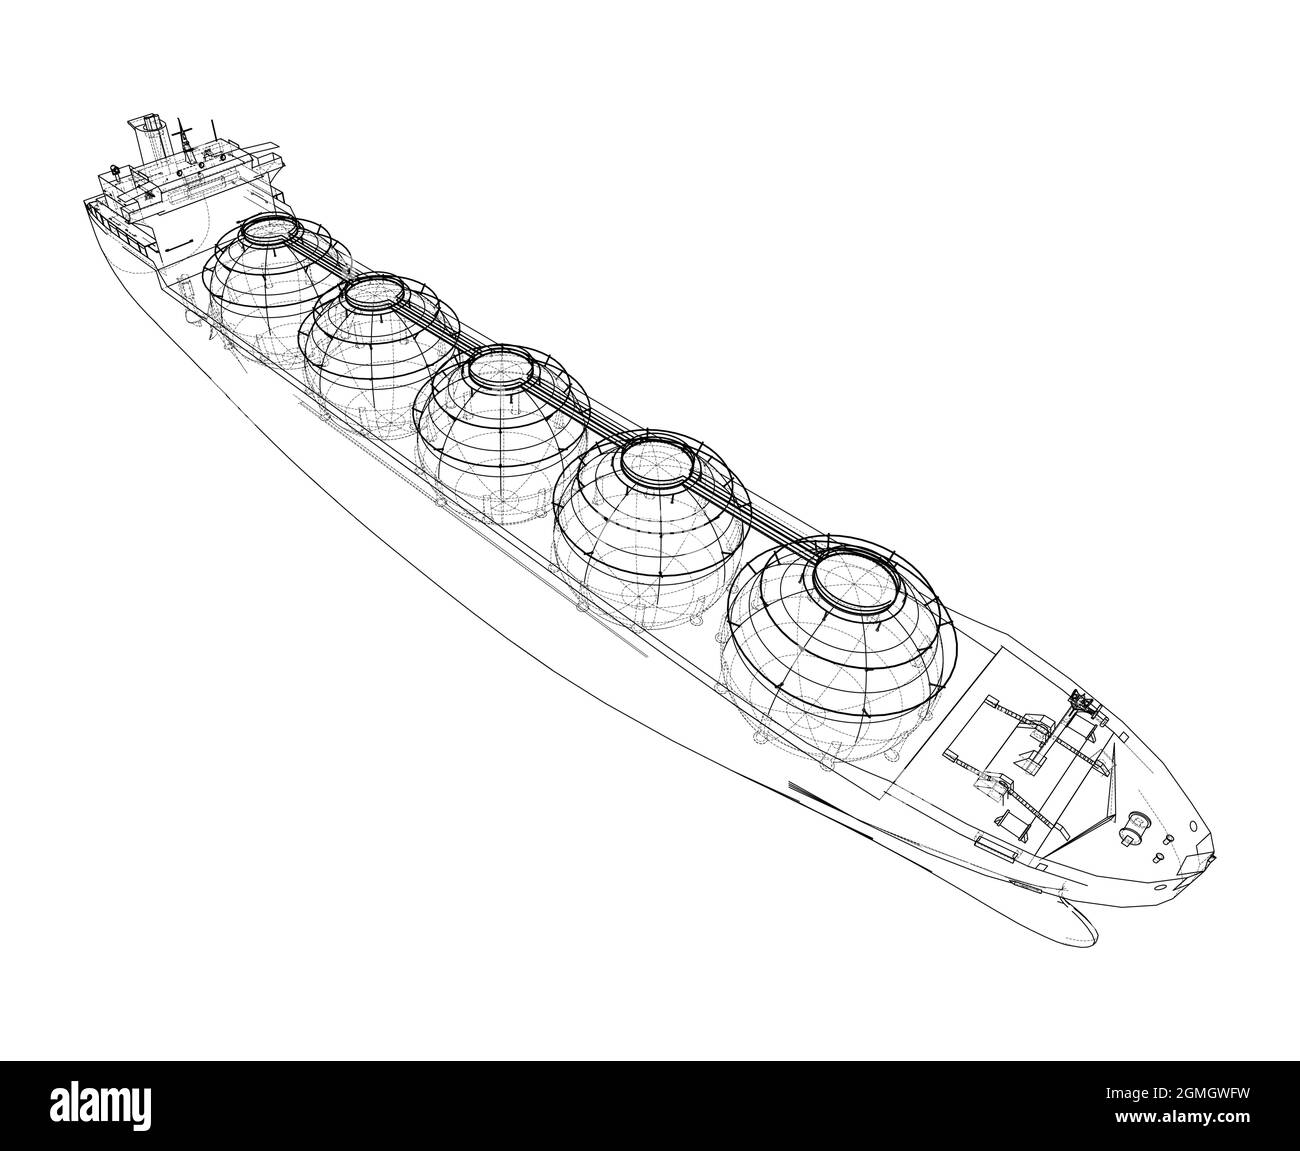 Large gas tanker or LNG carrier. Vector Stock Vector